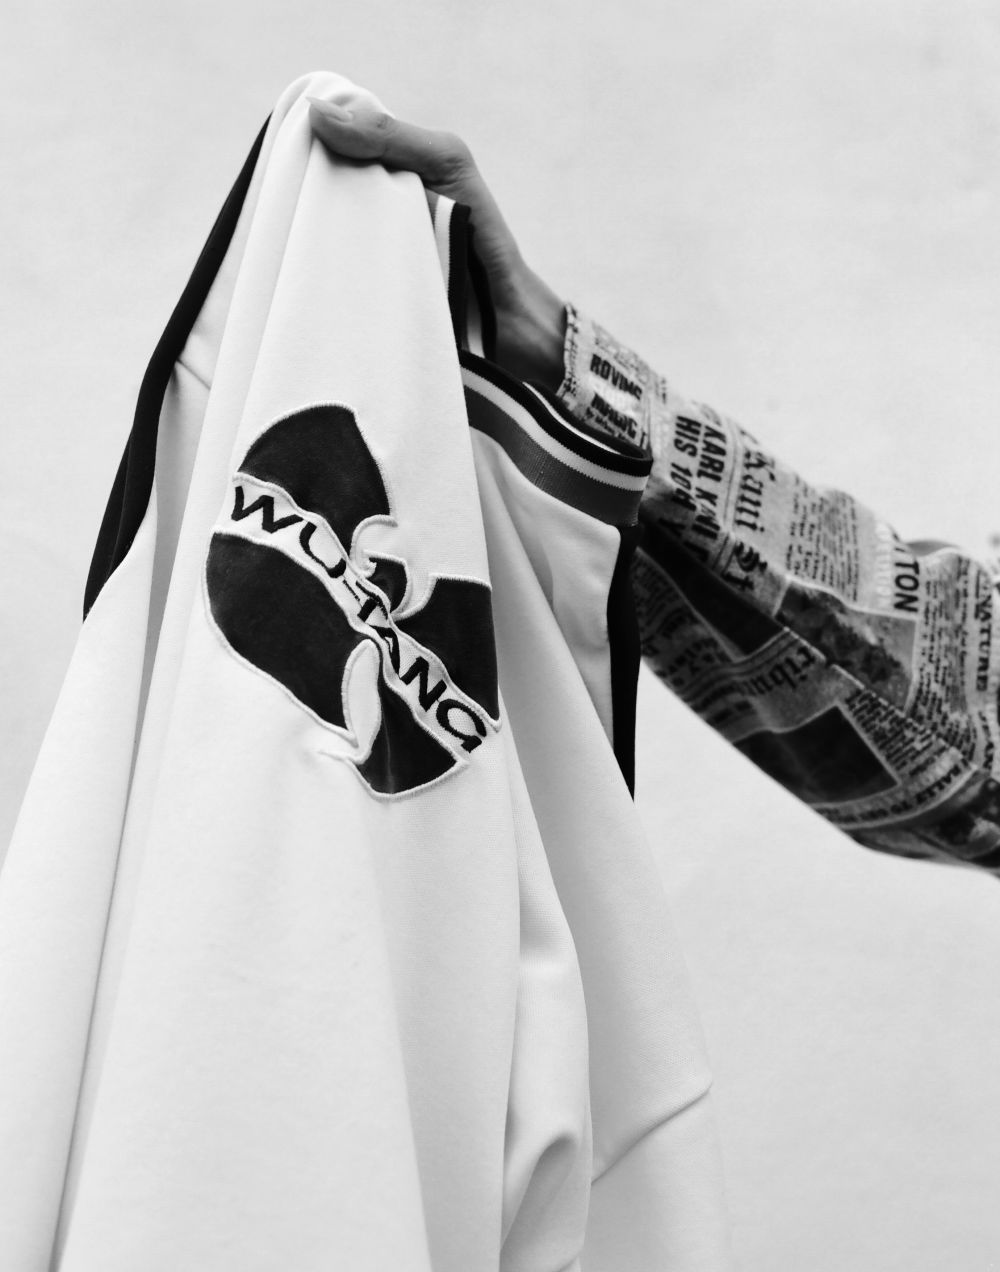 Photograph of a sweatshirt with a Wu-Tang logo being held up 